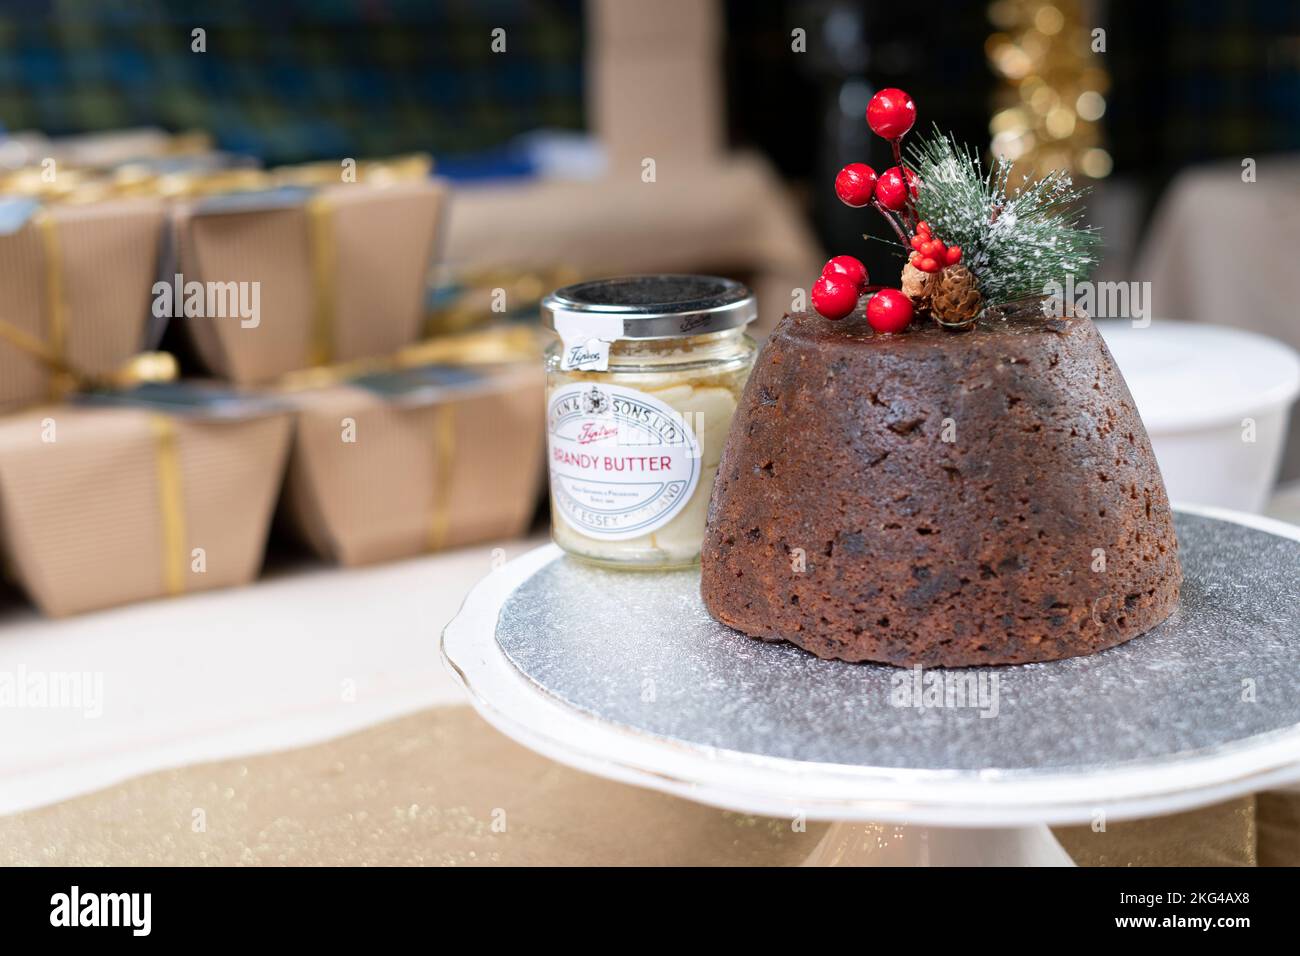 A traditional fresh Christmas pudding  with a jar of Brandy Butter. The pudding decorated with festive berries and a sprig of frosted pine leaves Stock Photo